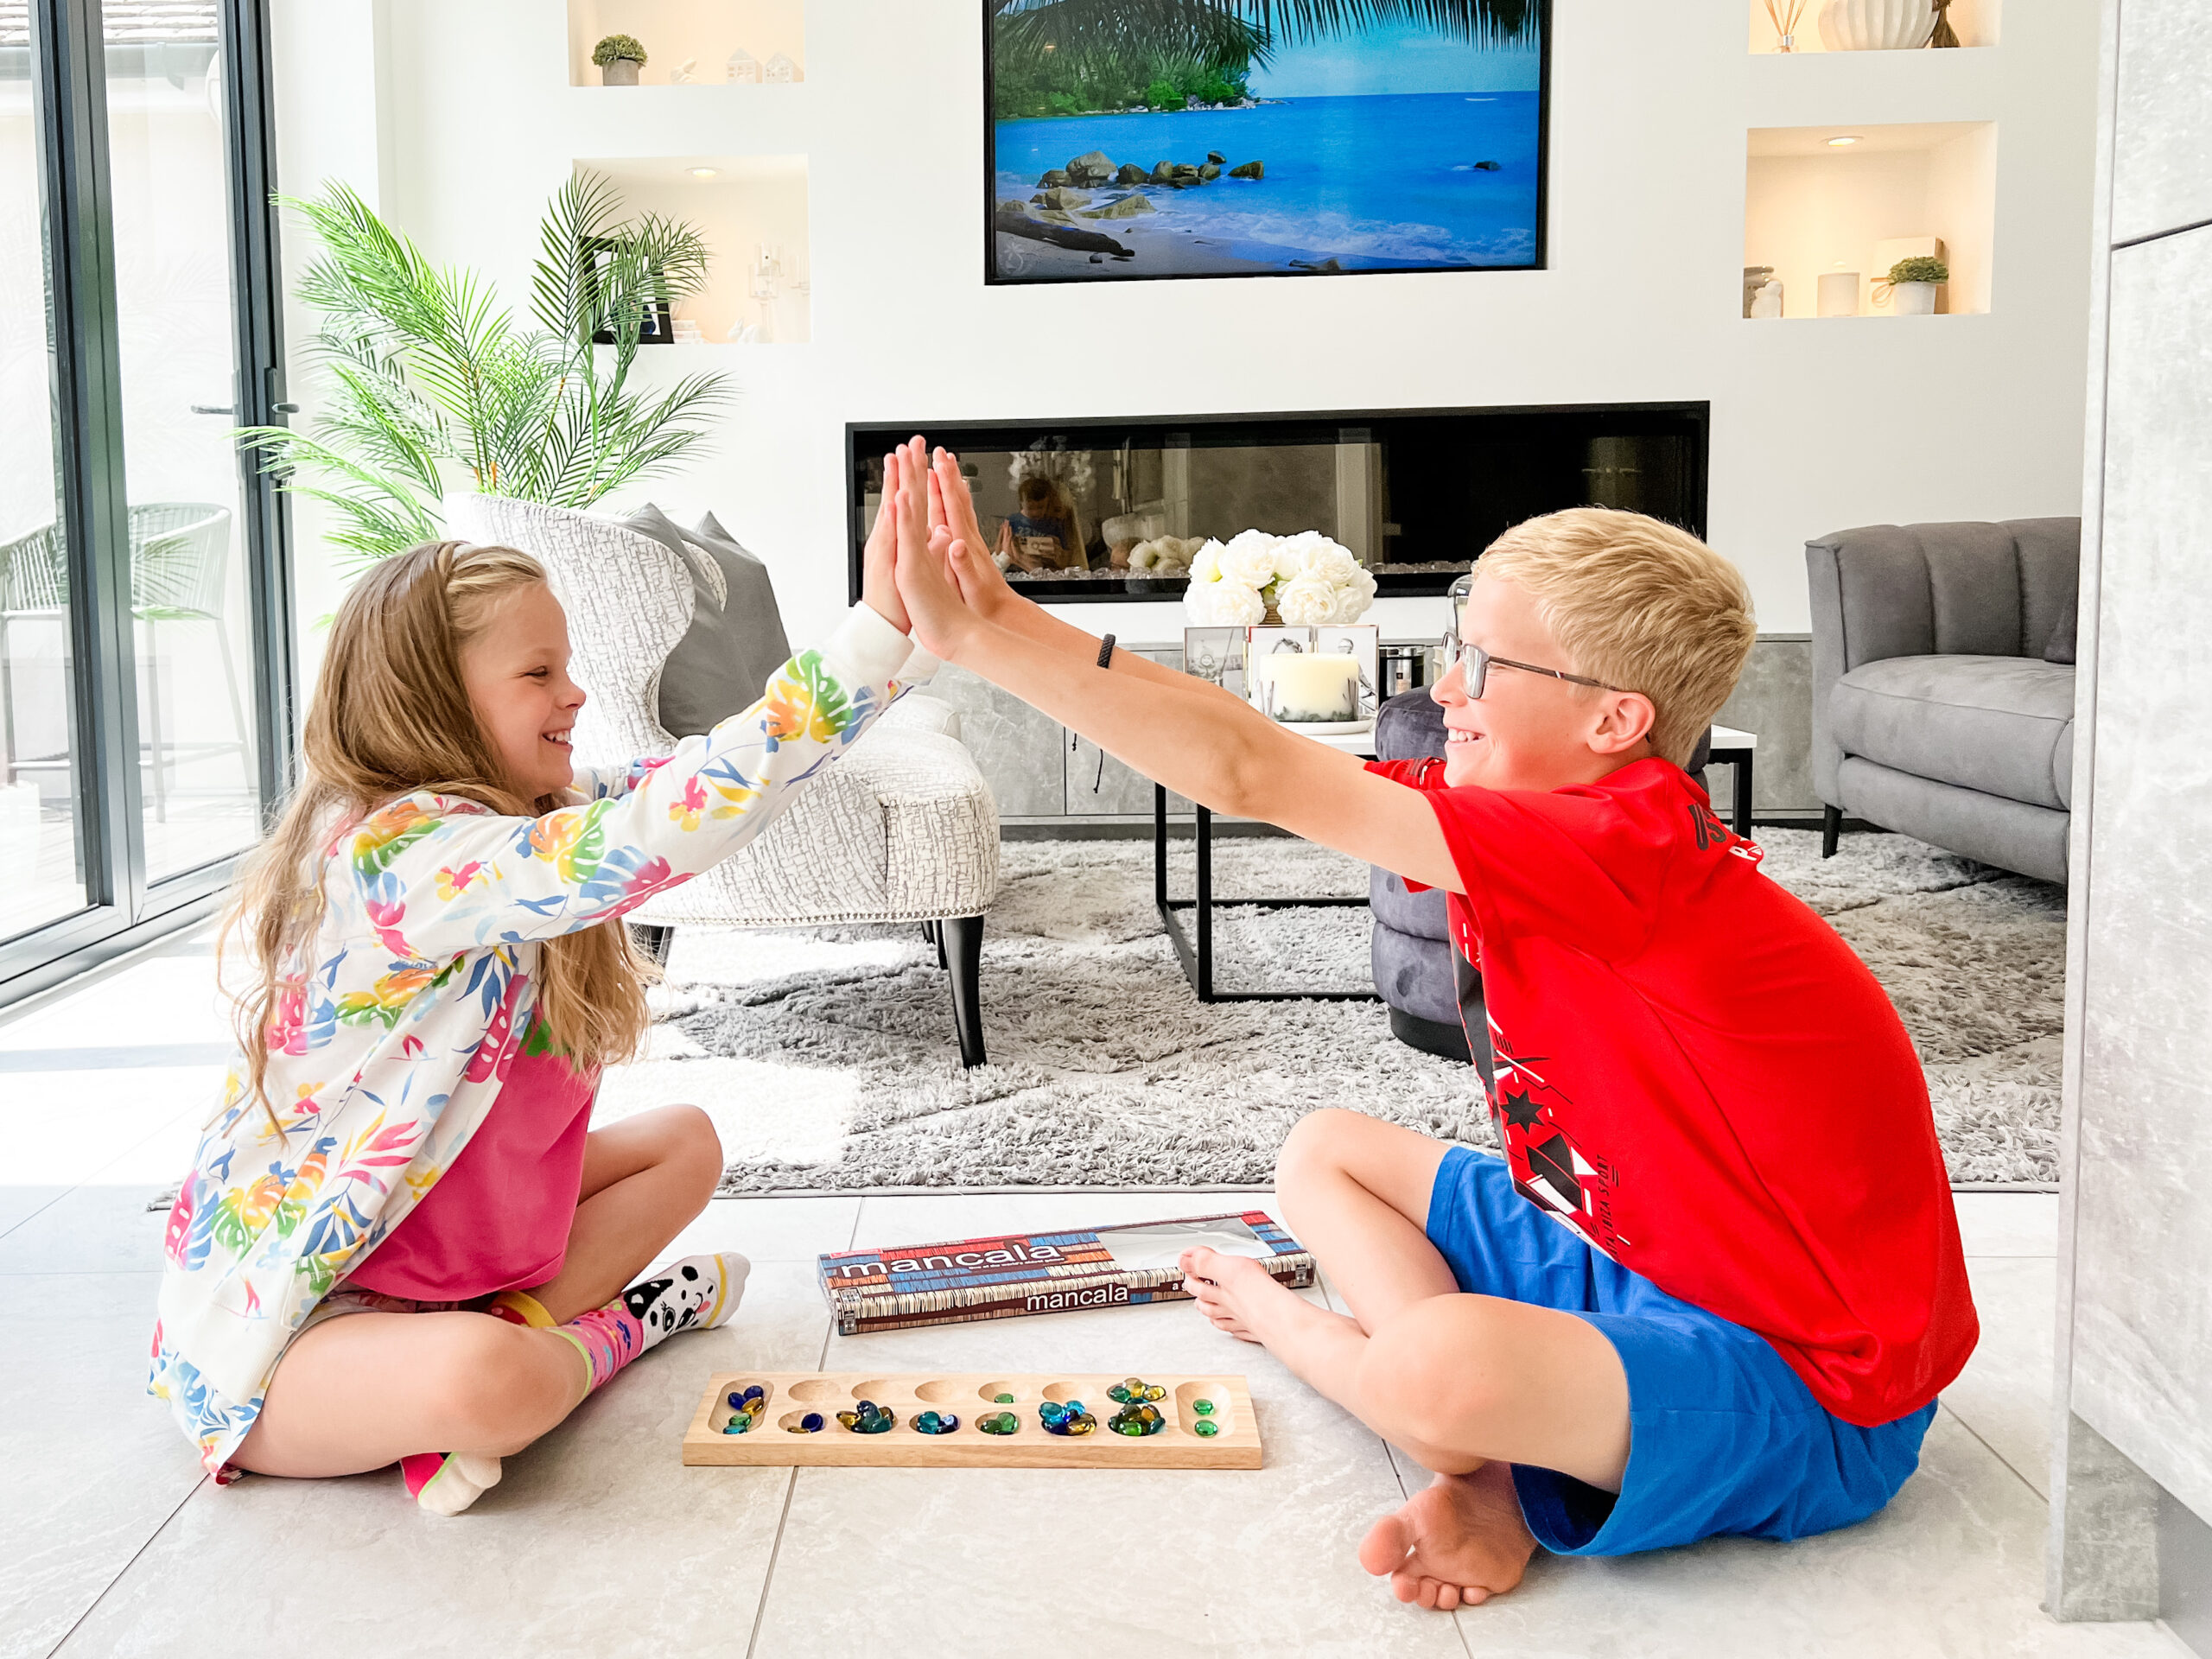 2 children sit on the floor playing a game. They give a double high five above the game